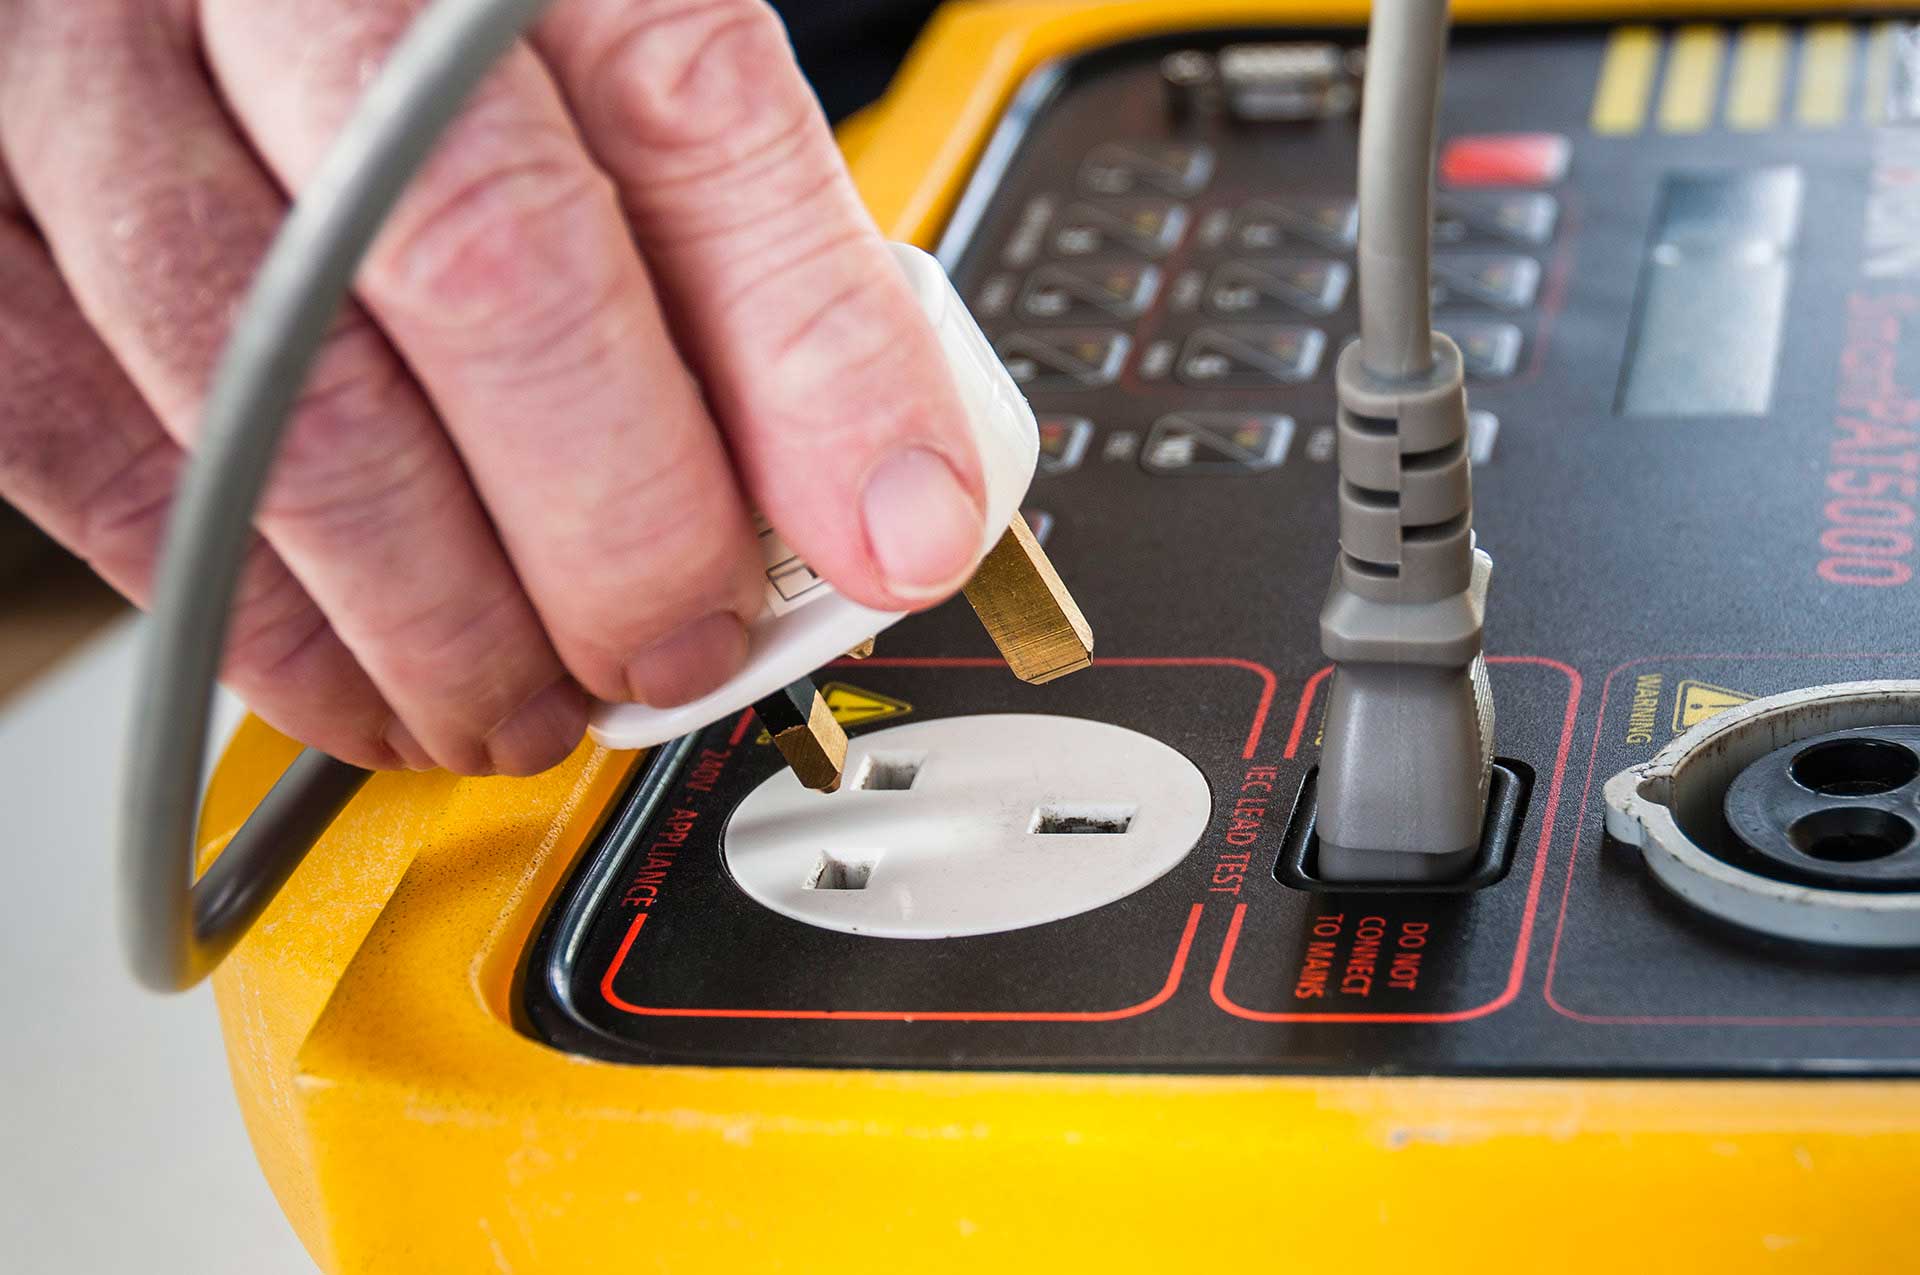 PAT Testing...Shocking! News For Business Owners